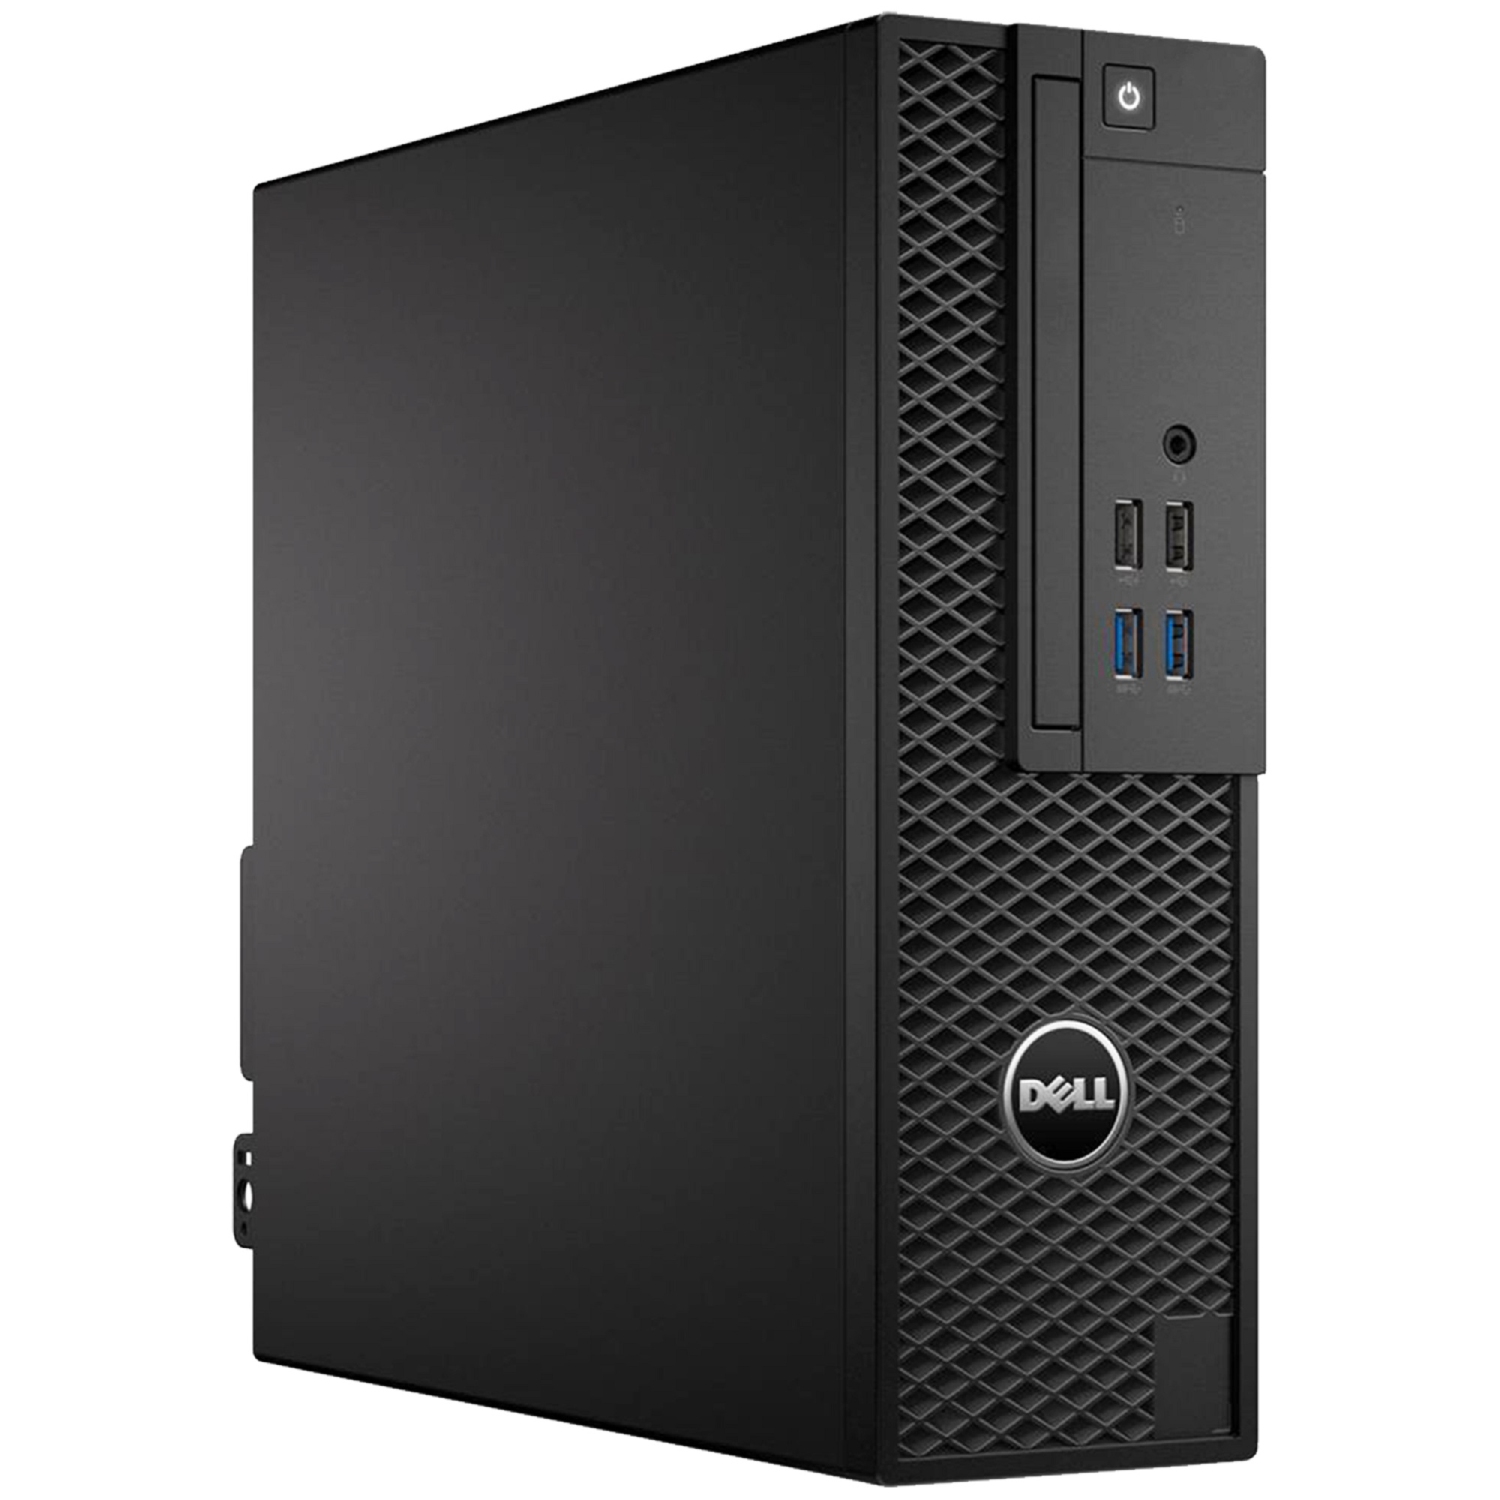 Refurbished (Good) - Dell Precision 3420 SFF Desktop Computer PC, Intel Core i5 up to 3.60 GHz, 8GB DDR4 RAM, 256GB NVMe SSD, Windows 10 Pro, Wireless Keyboard and Mouse - Black